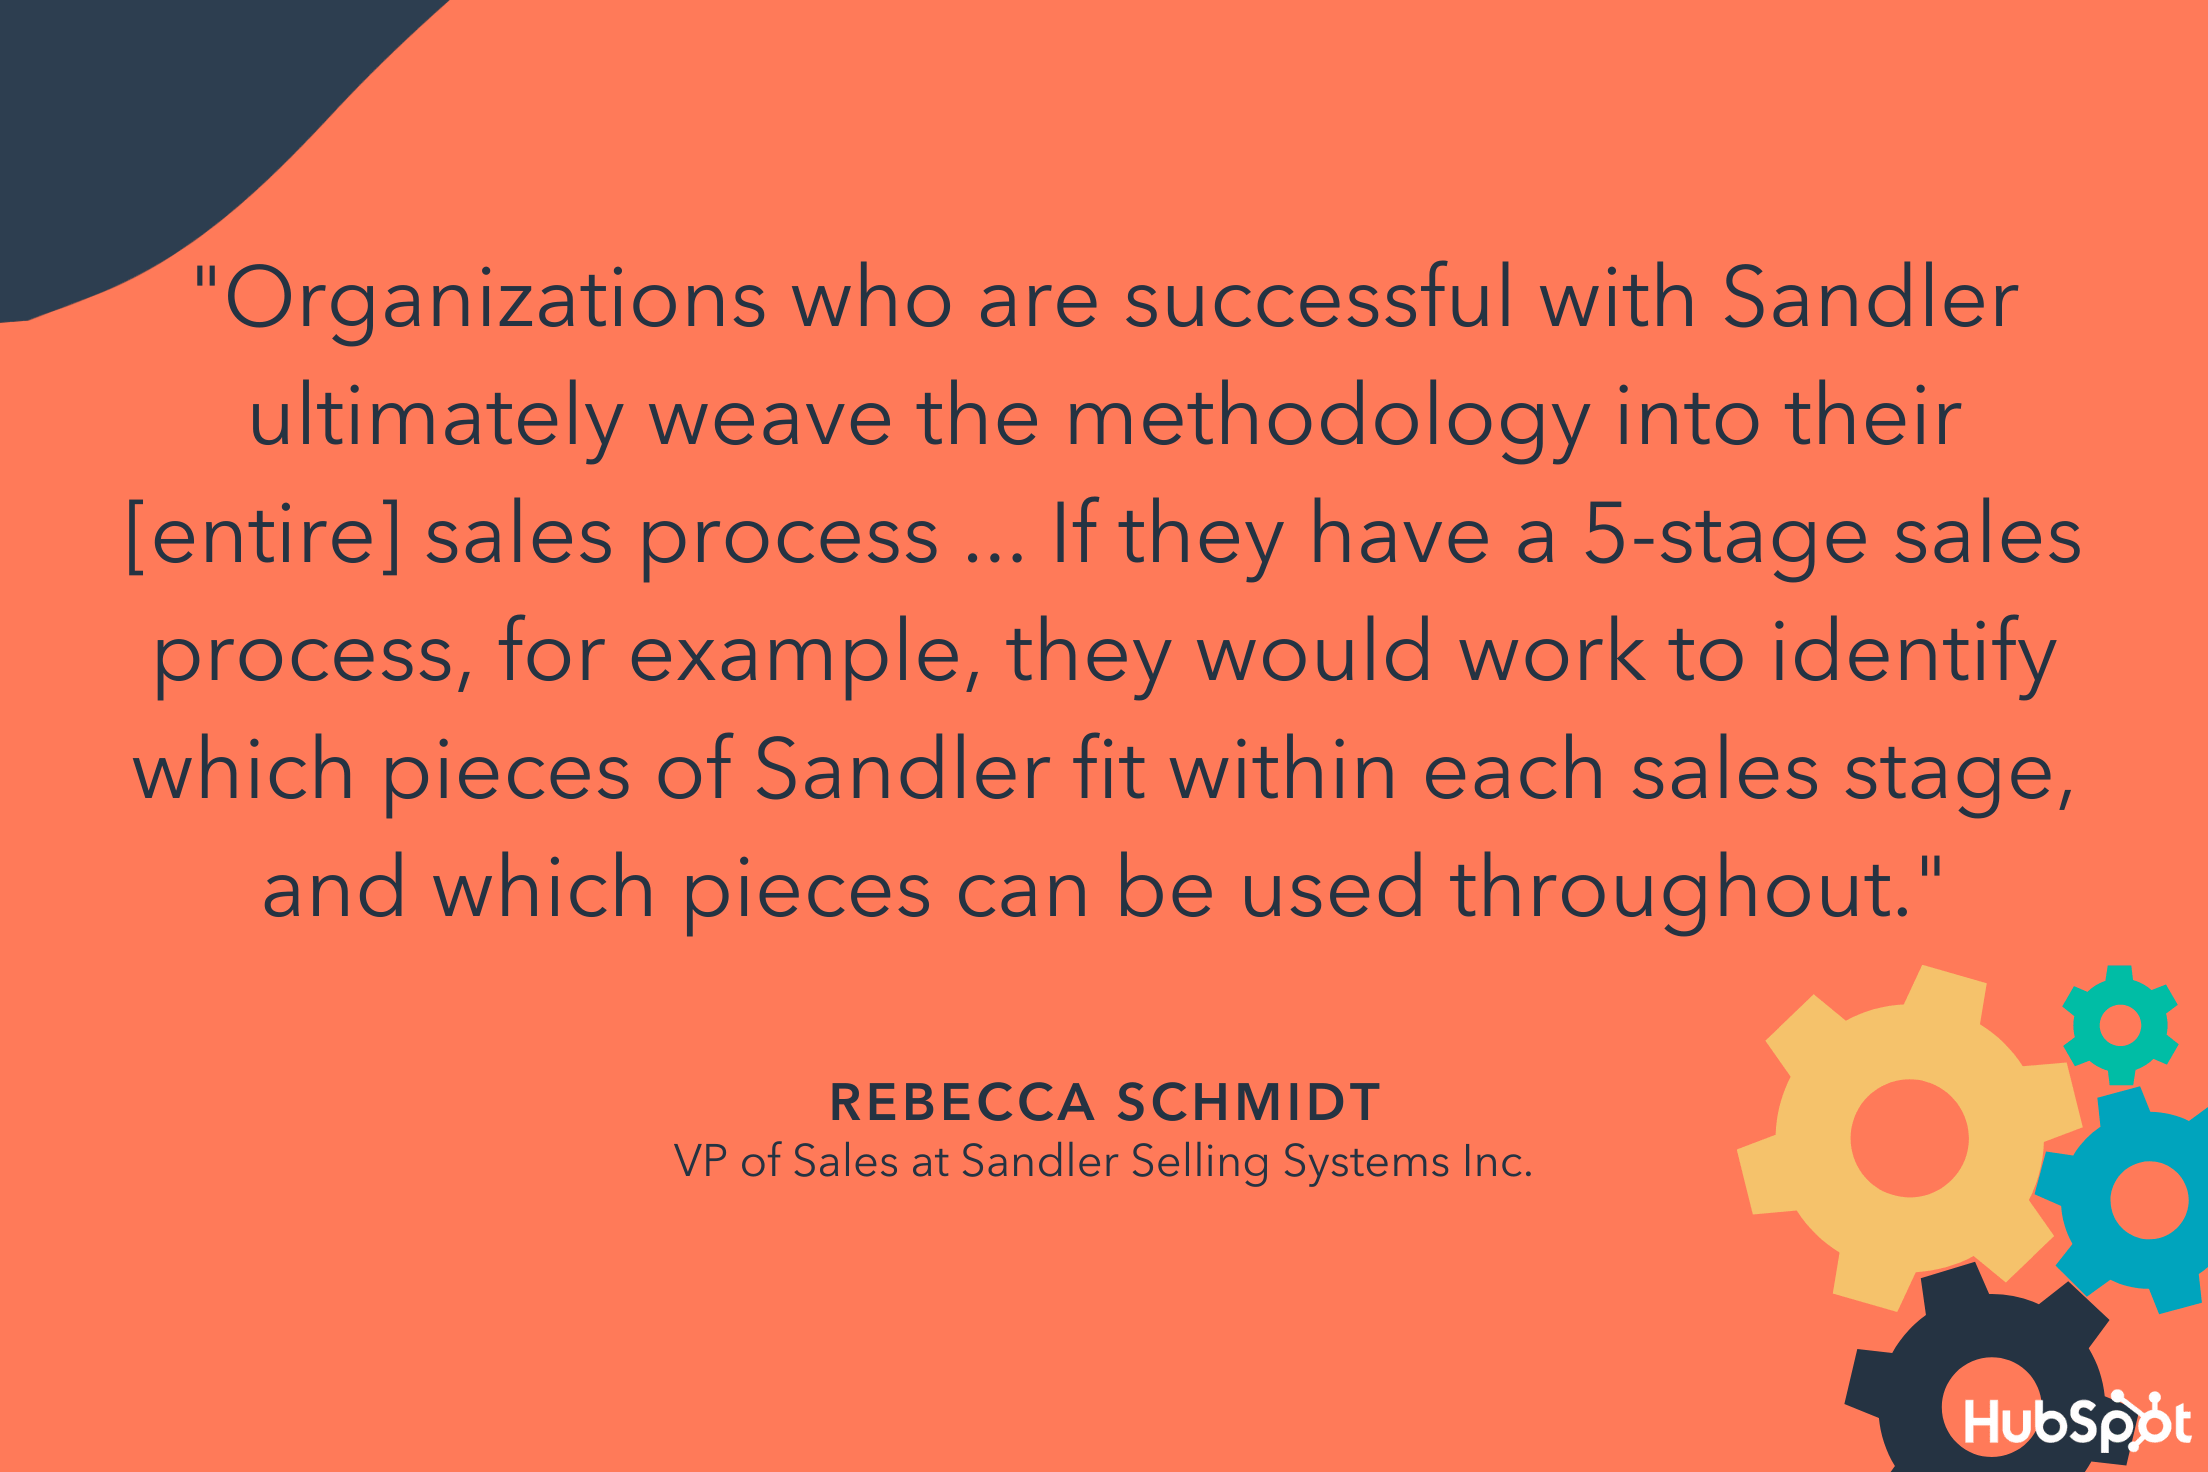 Rebecca Schmidt on how to implement the Sandler System